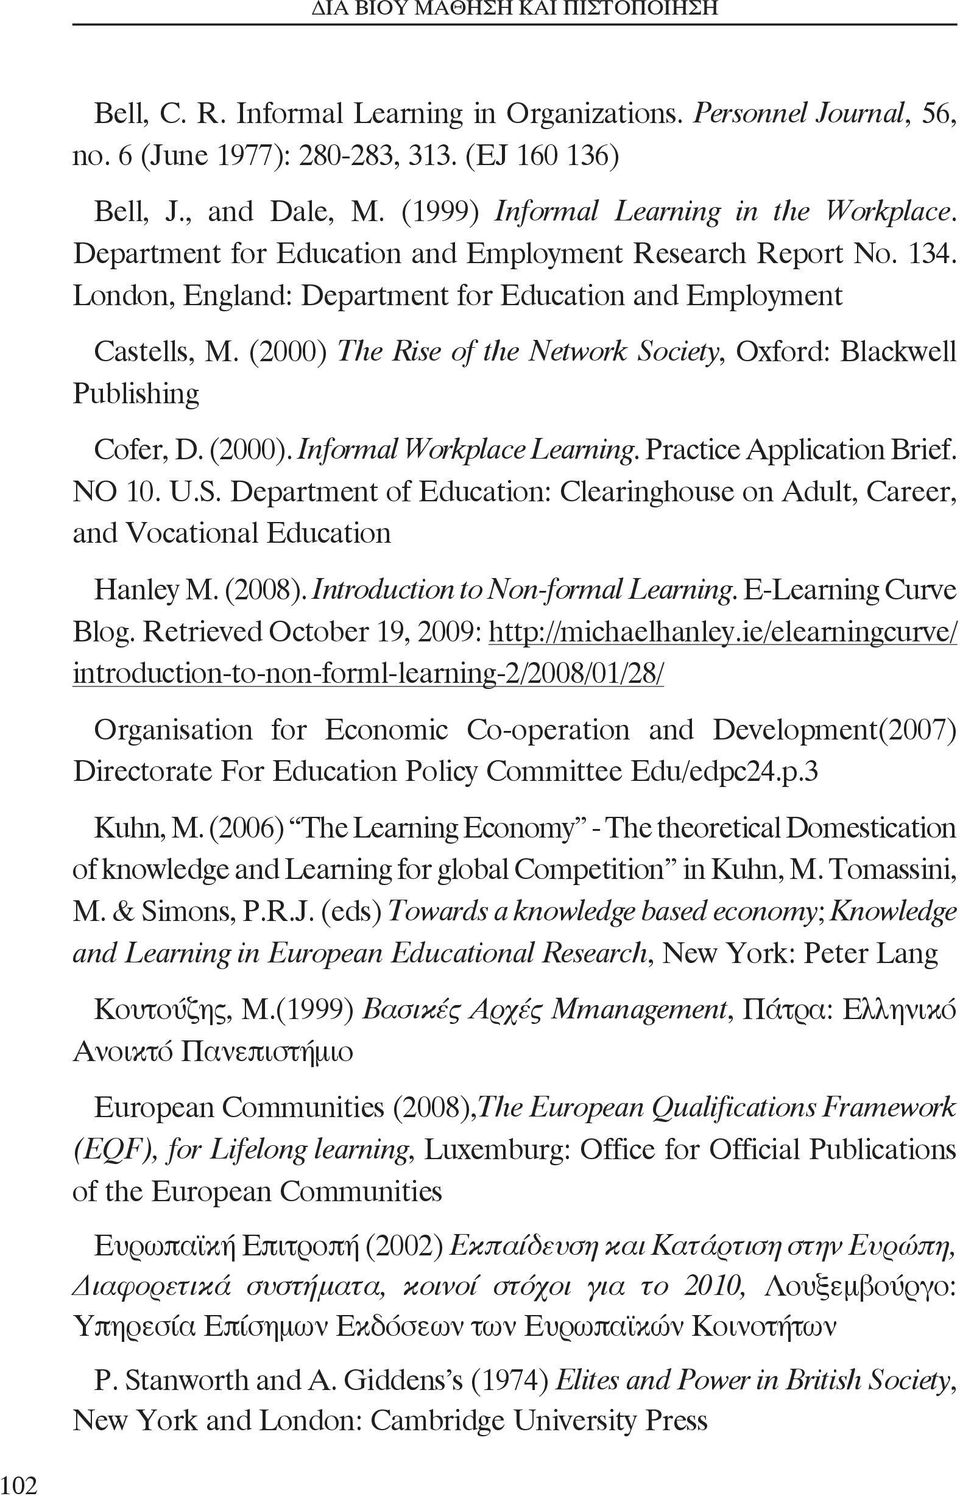 (2000) The Rise of the Network Society, Oxford: Blackwell Publishing Cofer, D. (2000). Informal Workplace Learning. Practice Application Brief. NO 10. U.S. Department of Education: Clearinghouse on Adult, Career, and Vocational Education Hanley M.